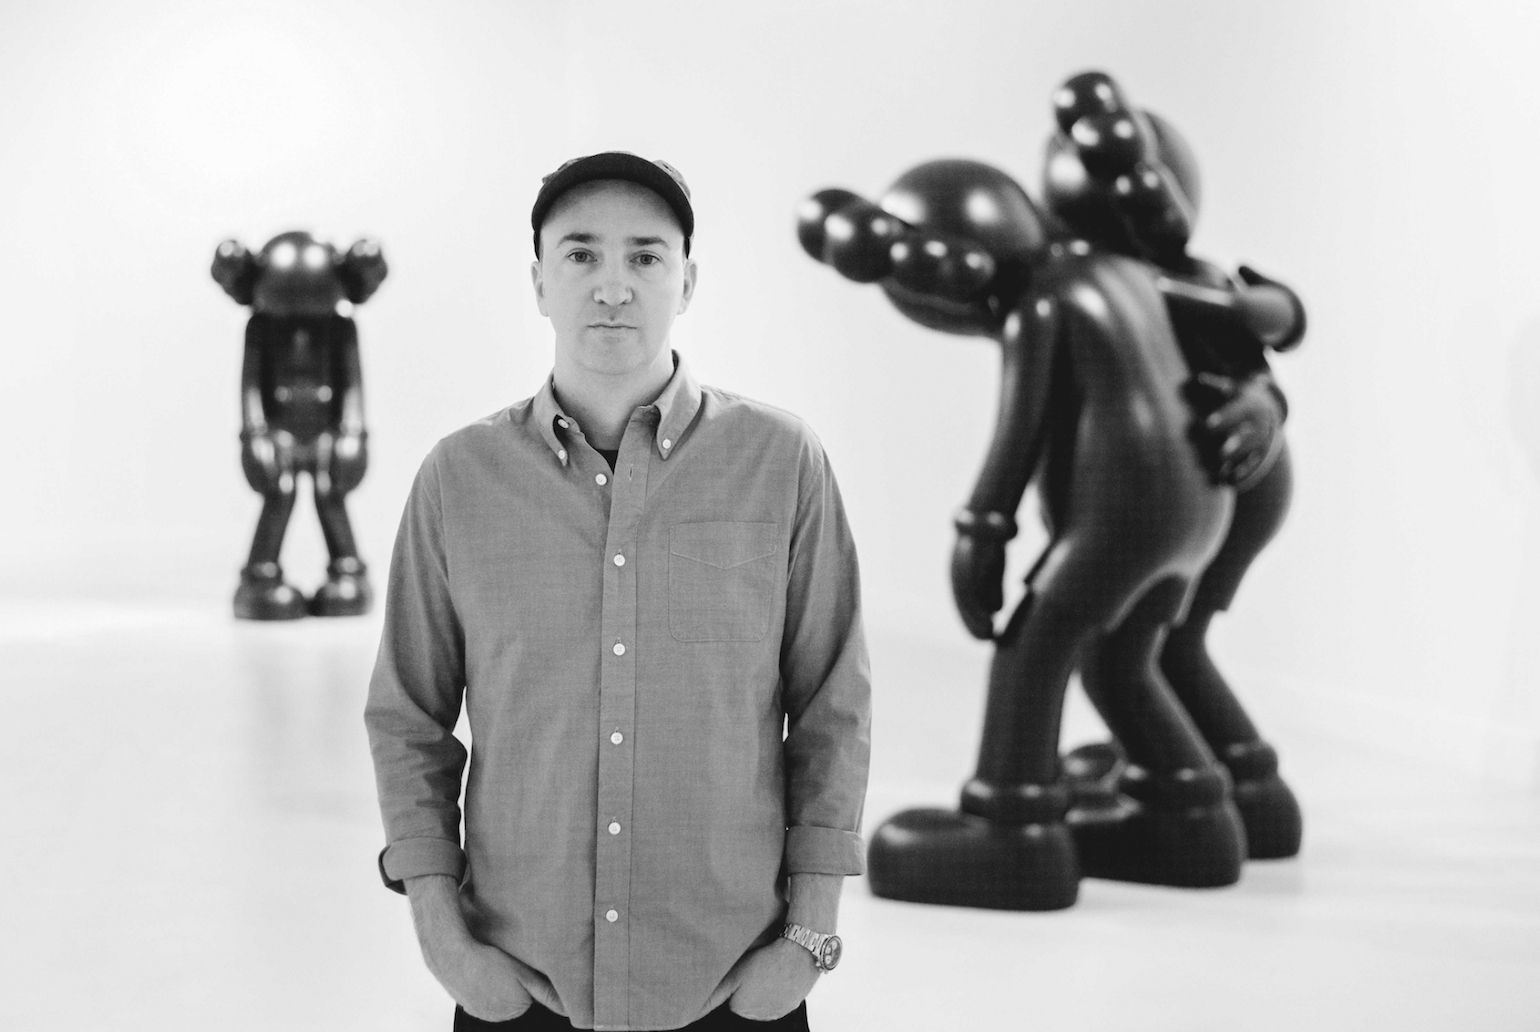 Here’s how to get your hands on Kaws’ highly coveted figurines